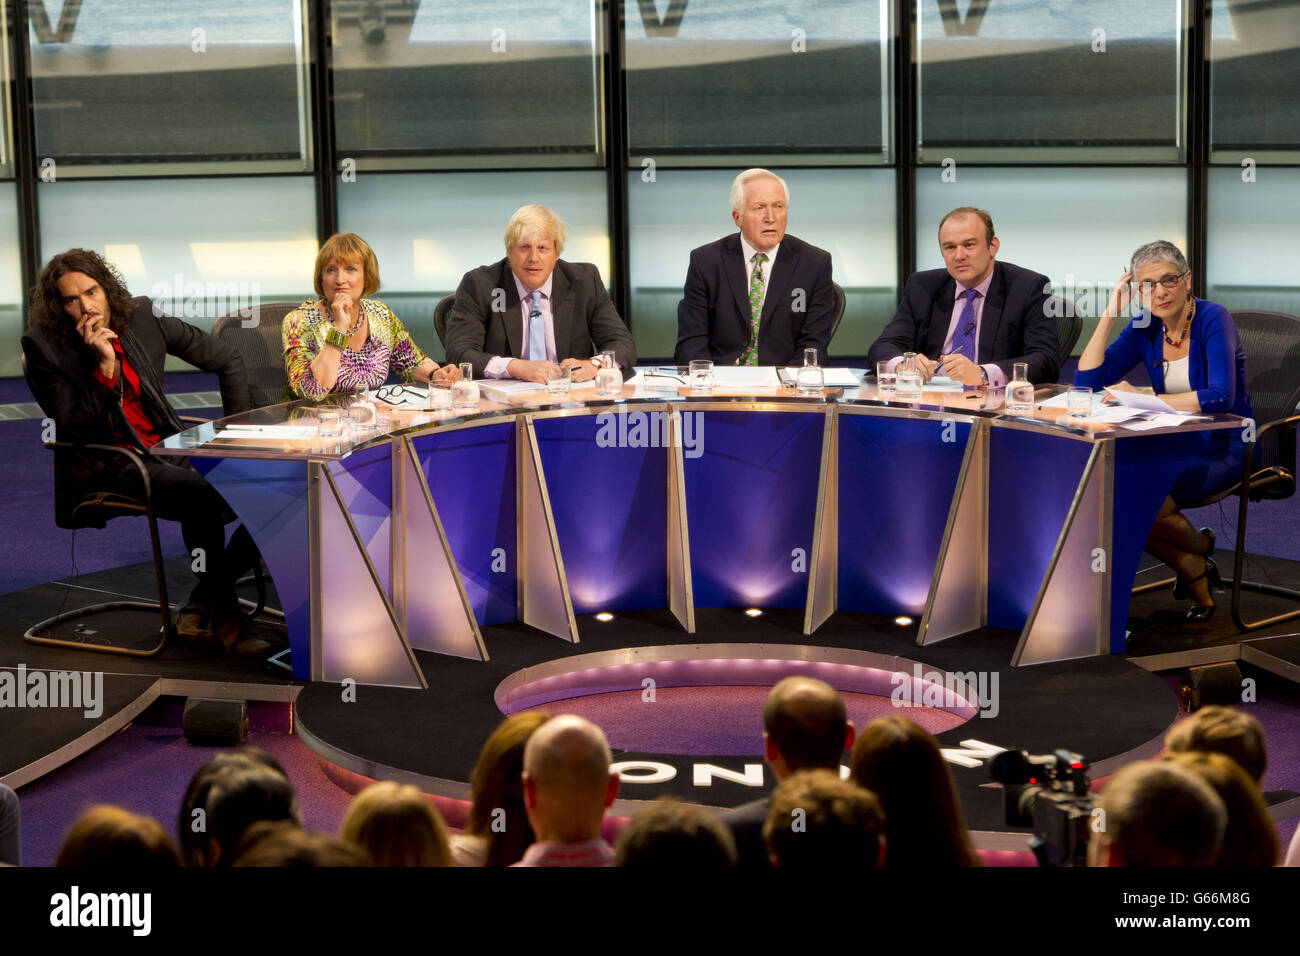 (left to right) The panel, Russell Brand, Labour MP Tessa Jowell, Mayor of London Boris Johnson, host David Dimbleby, Energy and Climate Change Secretary Ed Davey and writer Melanie Phillips, during the filming of Question Time, at City Hall in London. Stock Photo